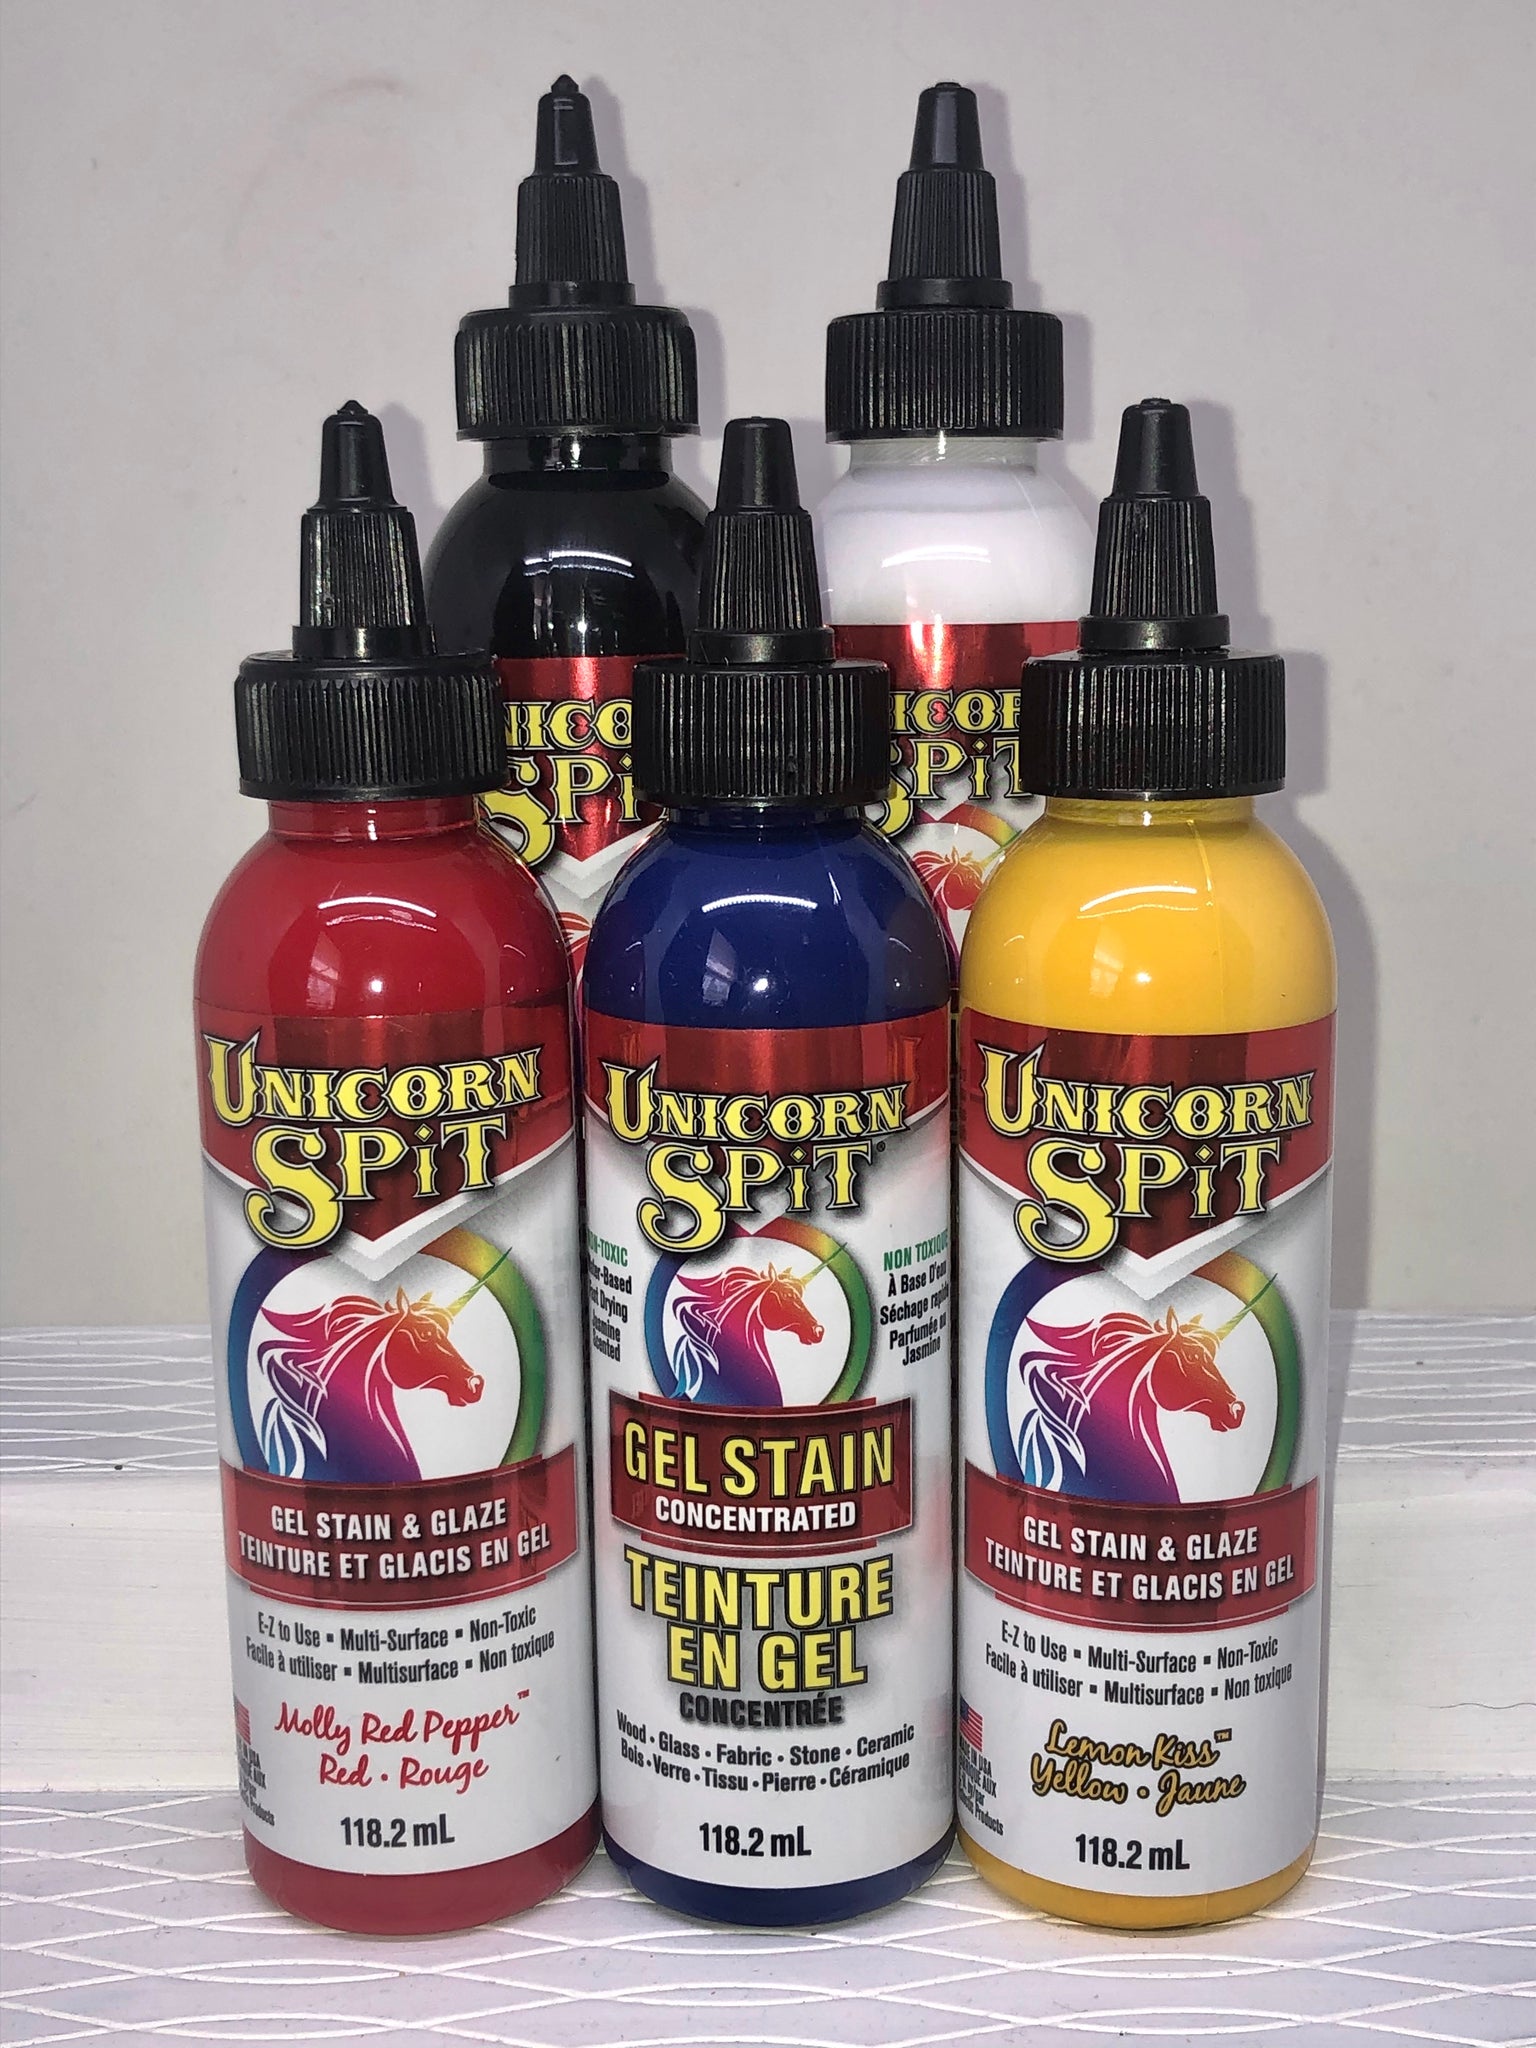 The Essential Collection Unicorn SPiT – Unicorn SPiT Canada